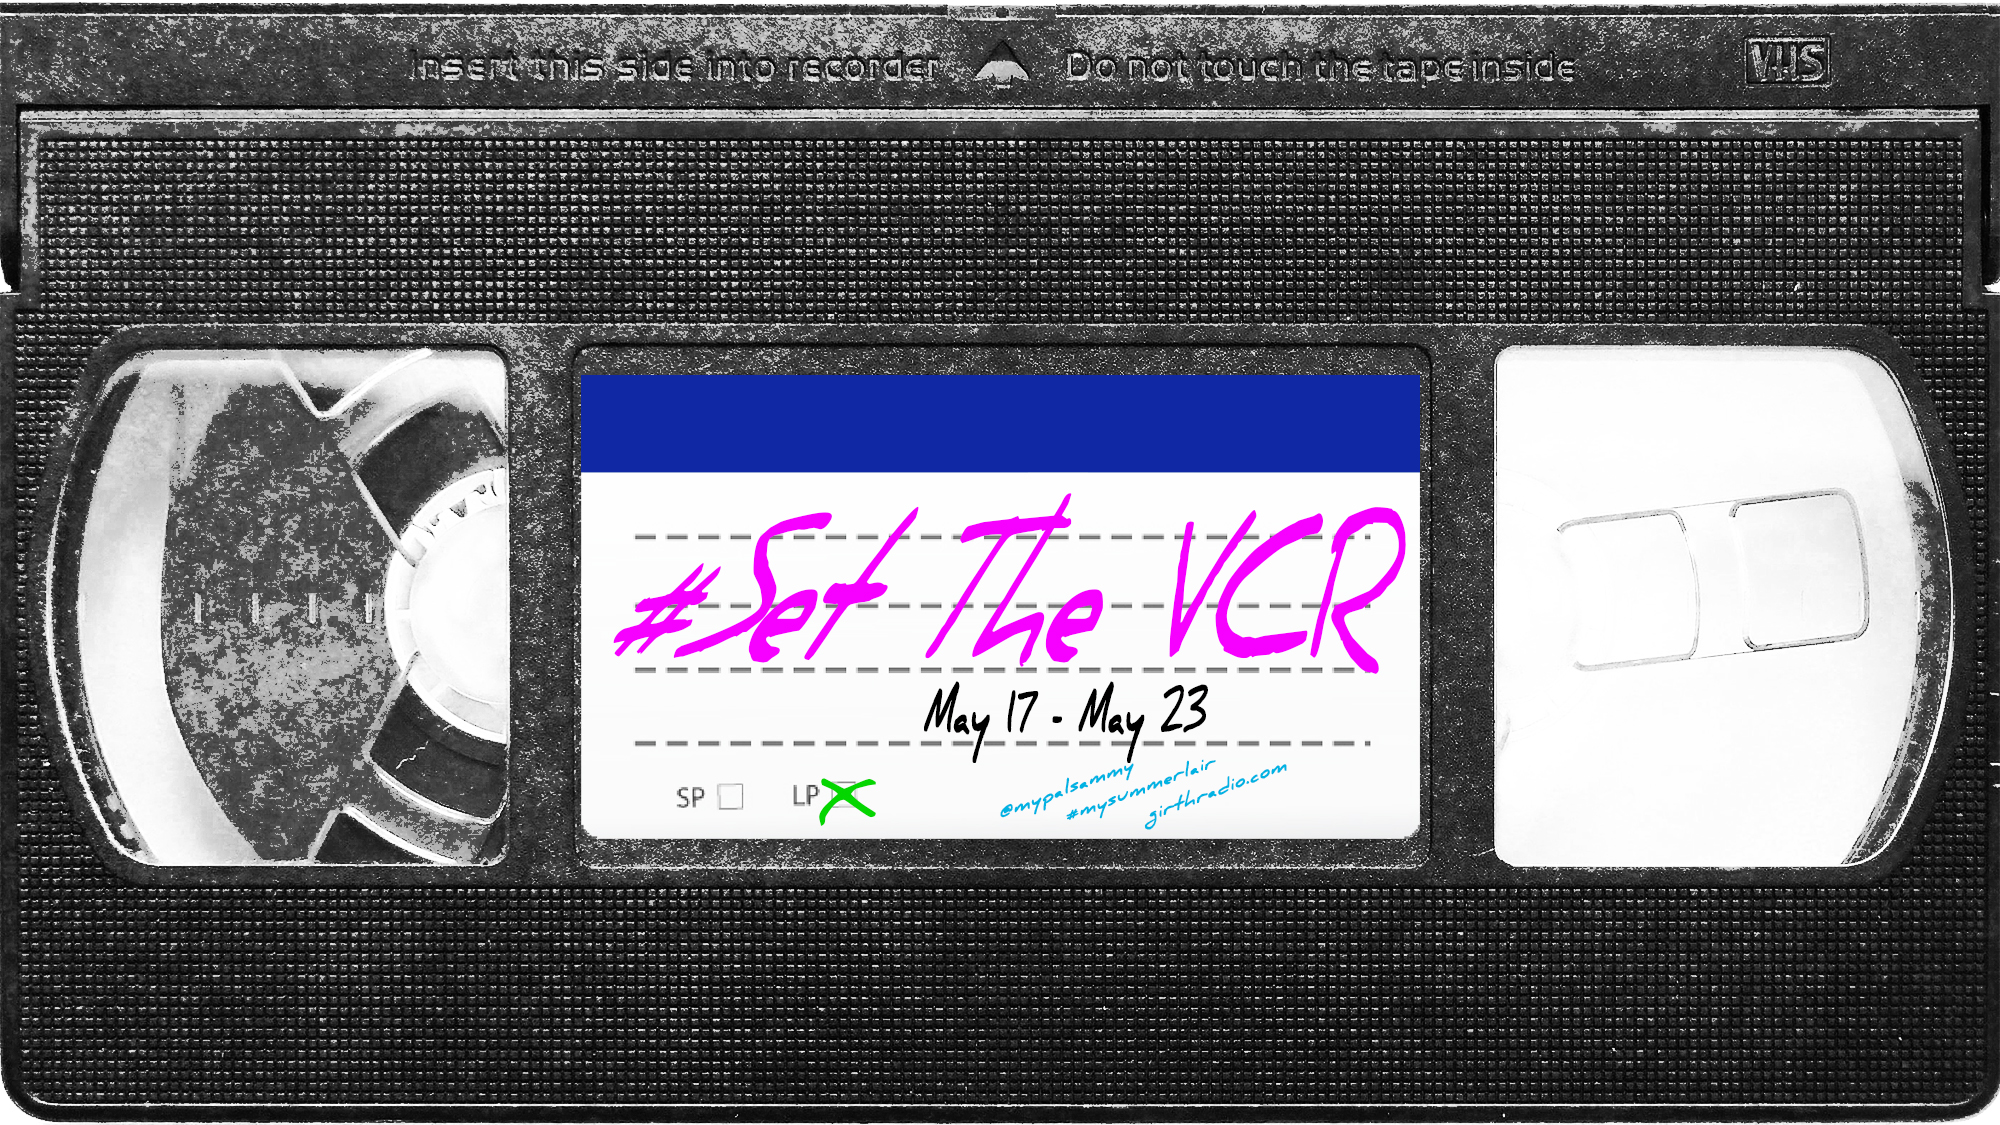 #SetTheVCR: May 17-23, 2020